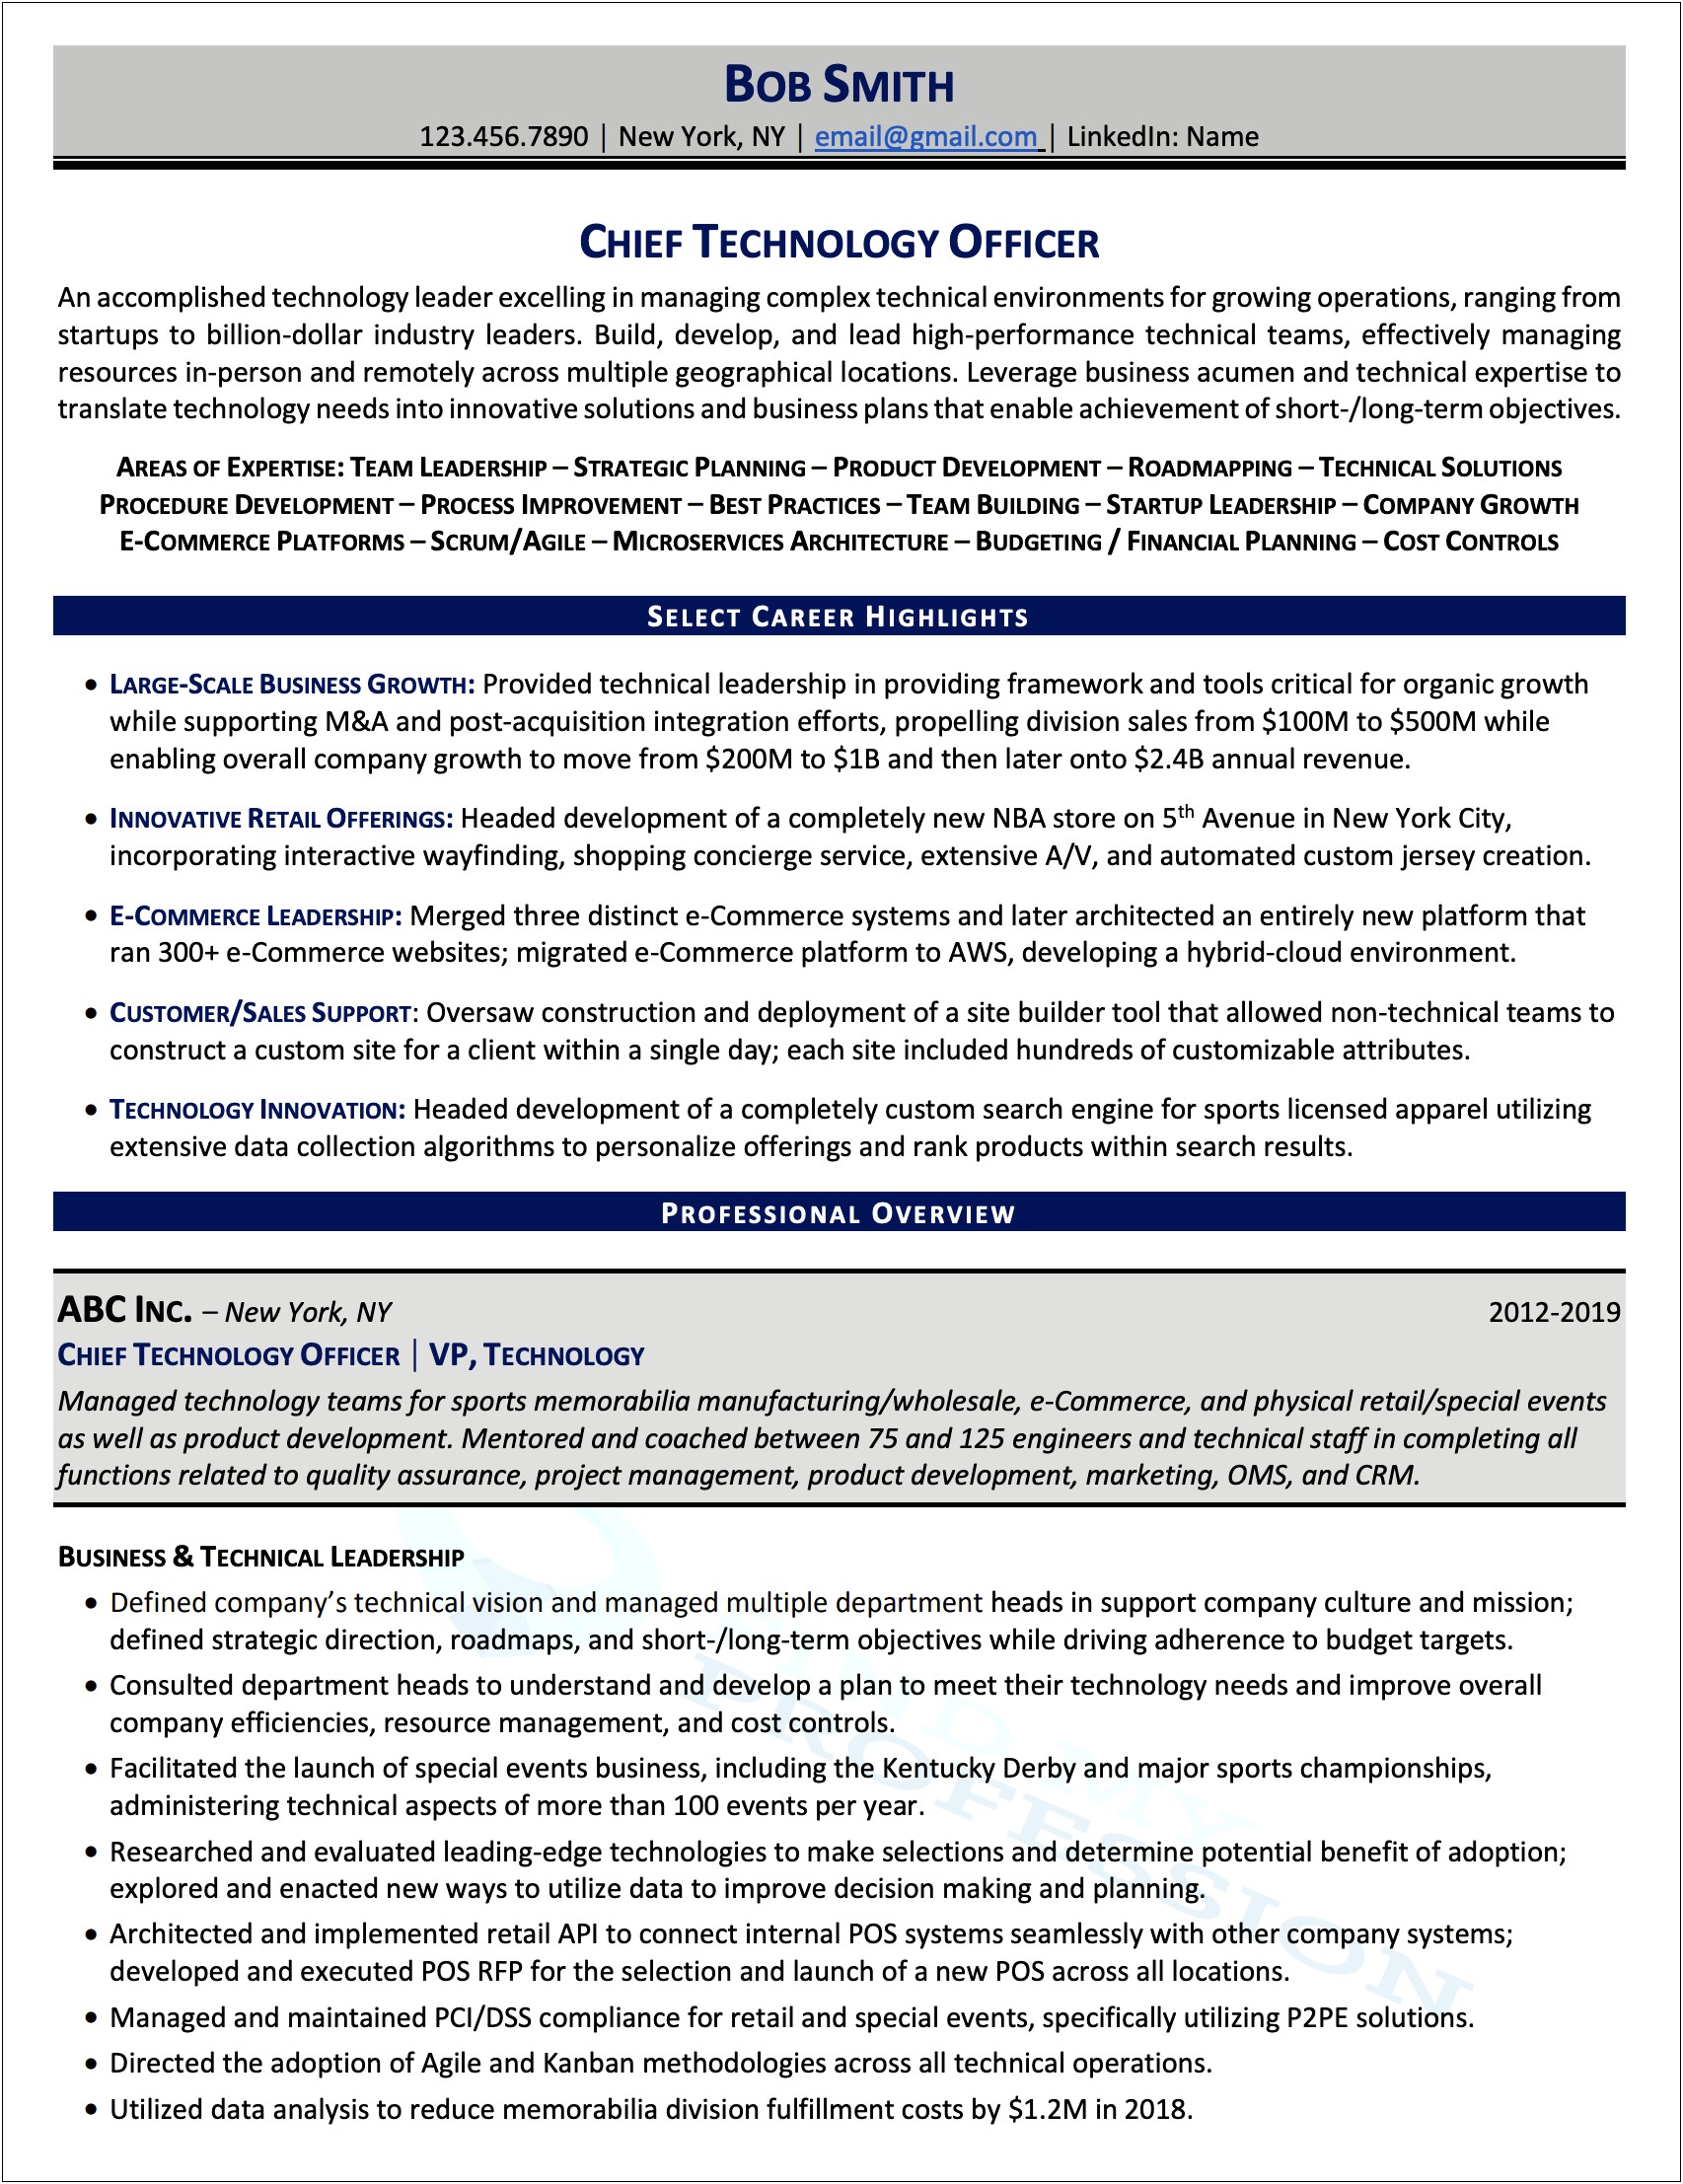 Resume Examples For Large Companies